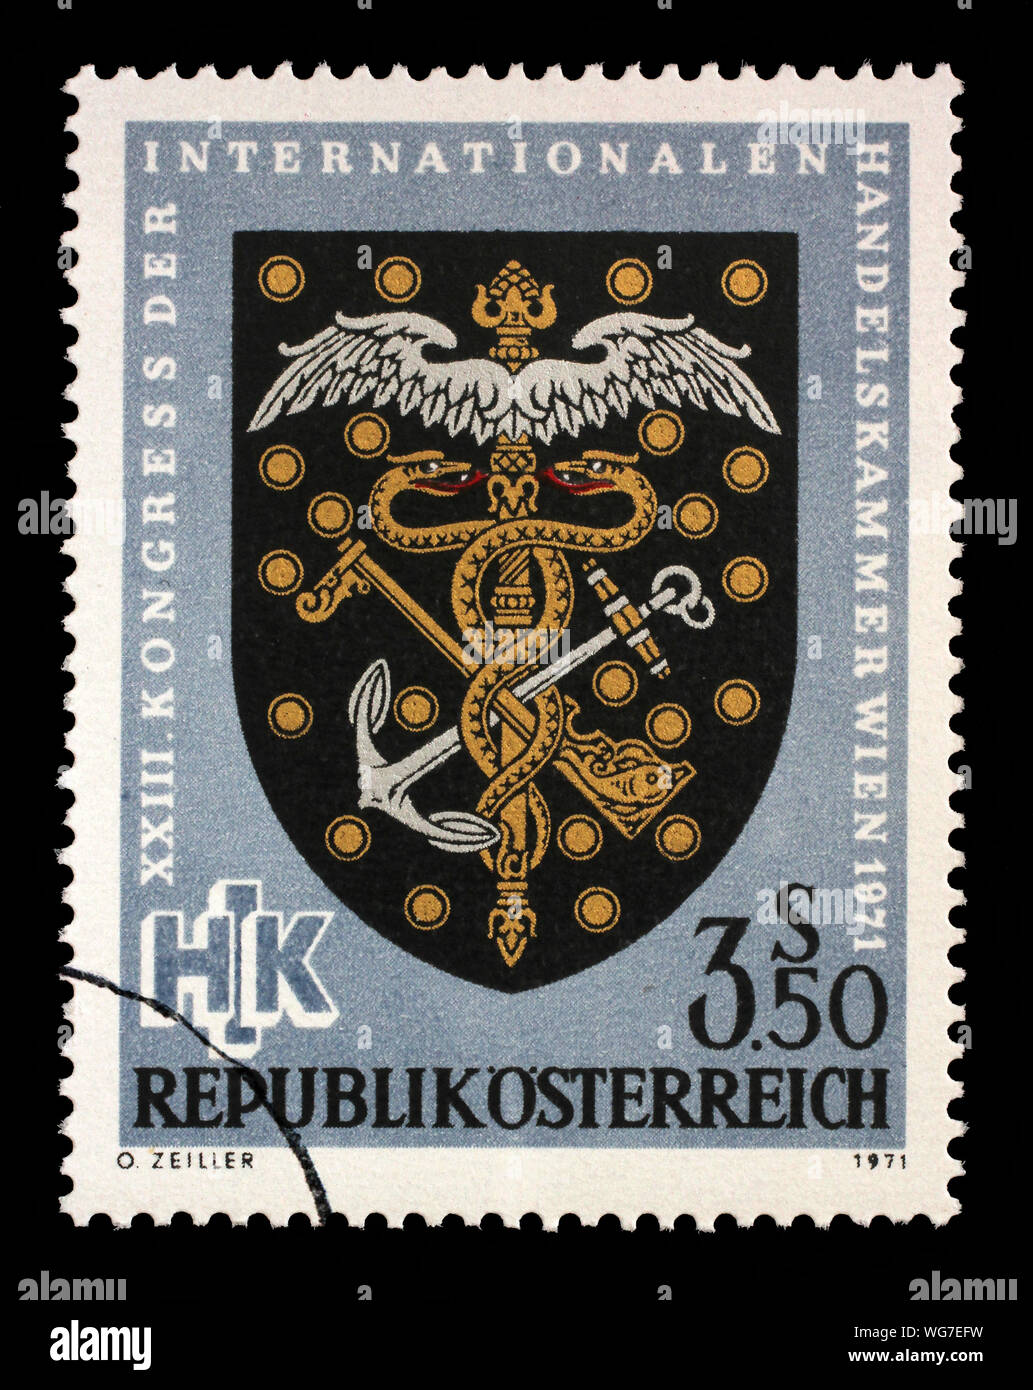 Stamp issued in the Austria shows Coat of arms of wholesalers (c. 1900), International Chamber of Commerce Congress, circa 1971. Stock Photo